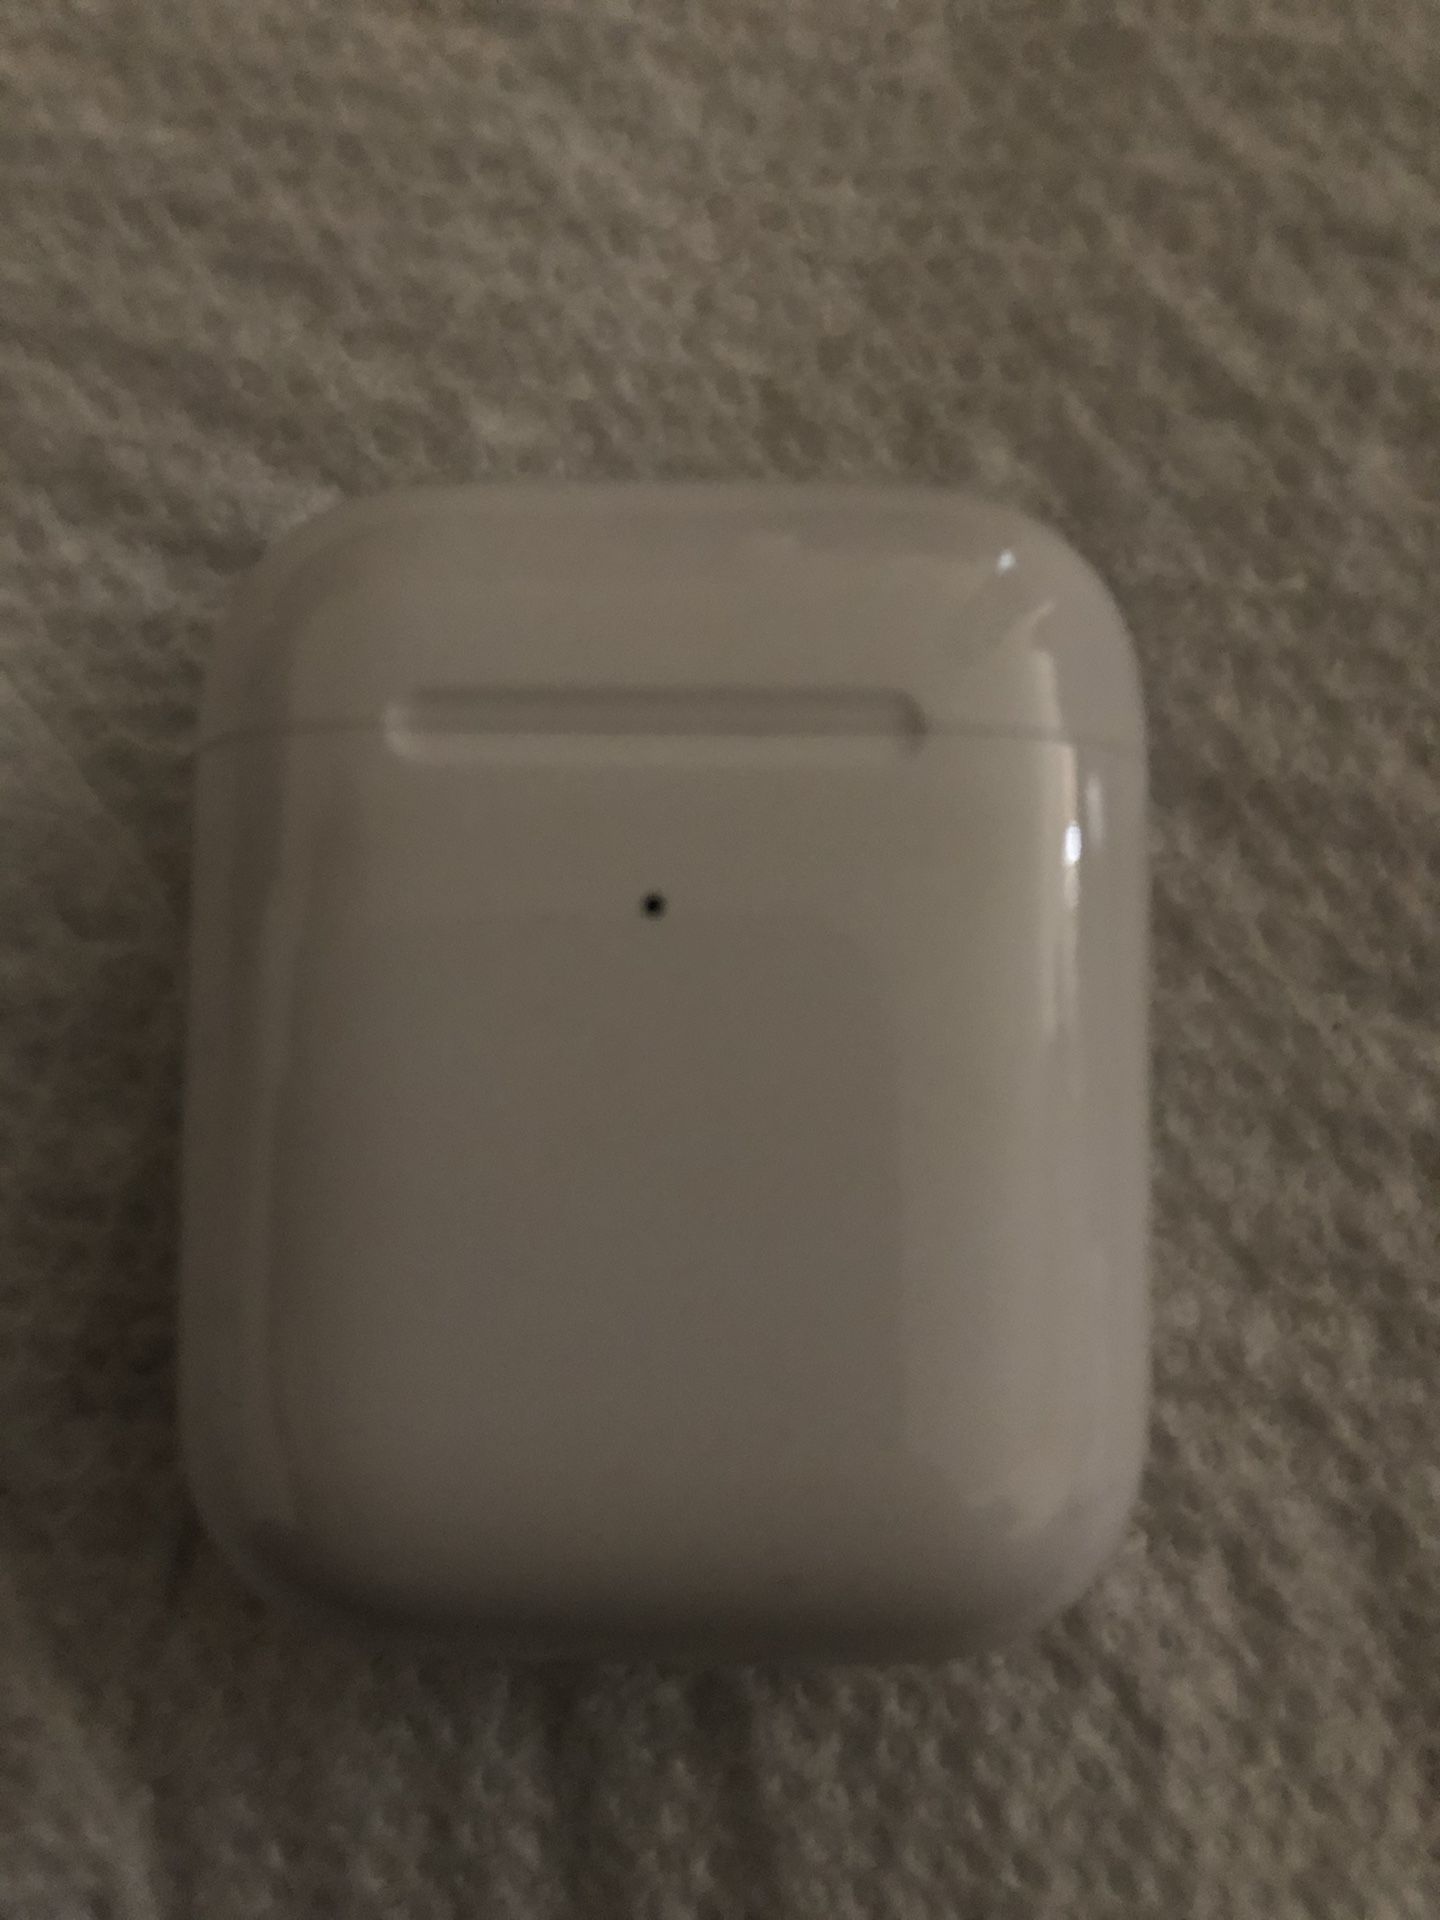 New Authentic AirPods 2nd Gen